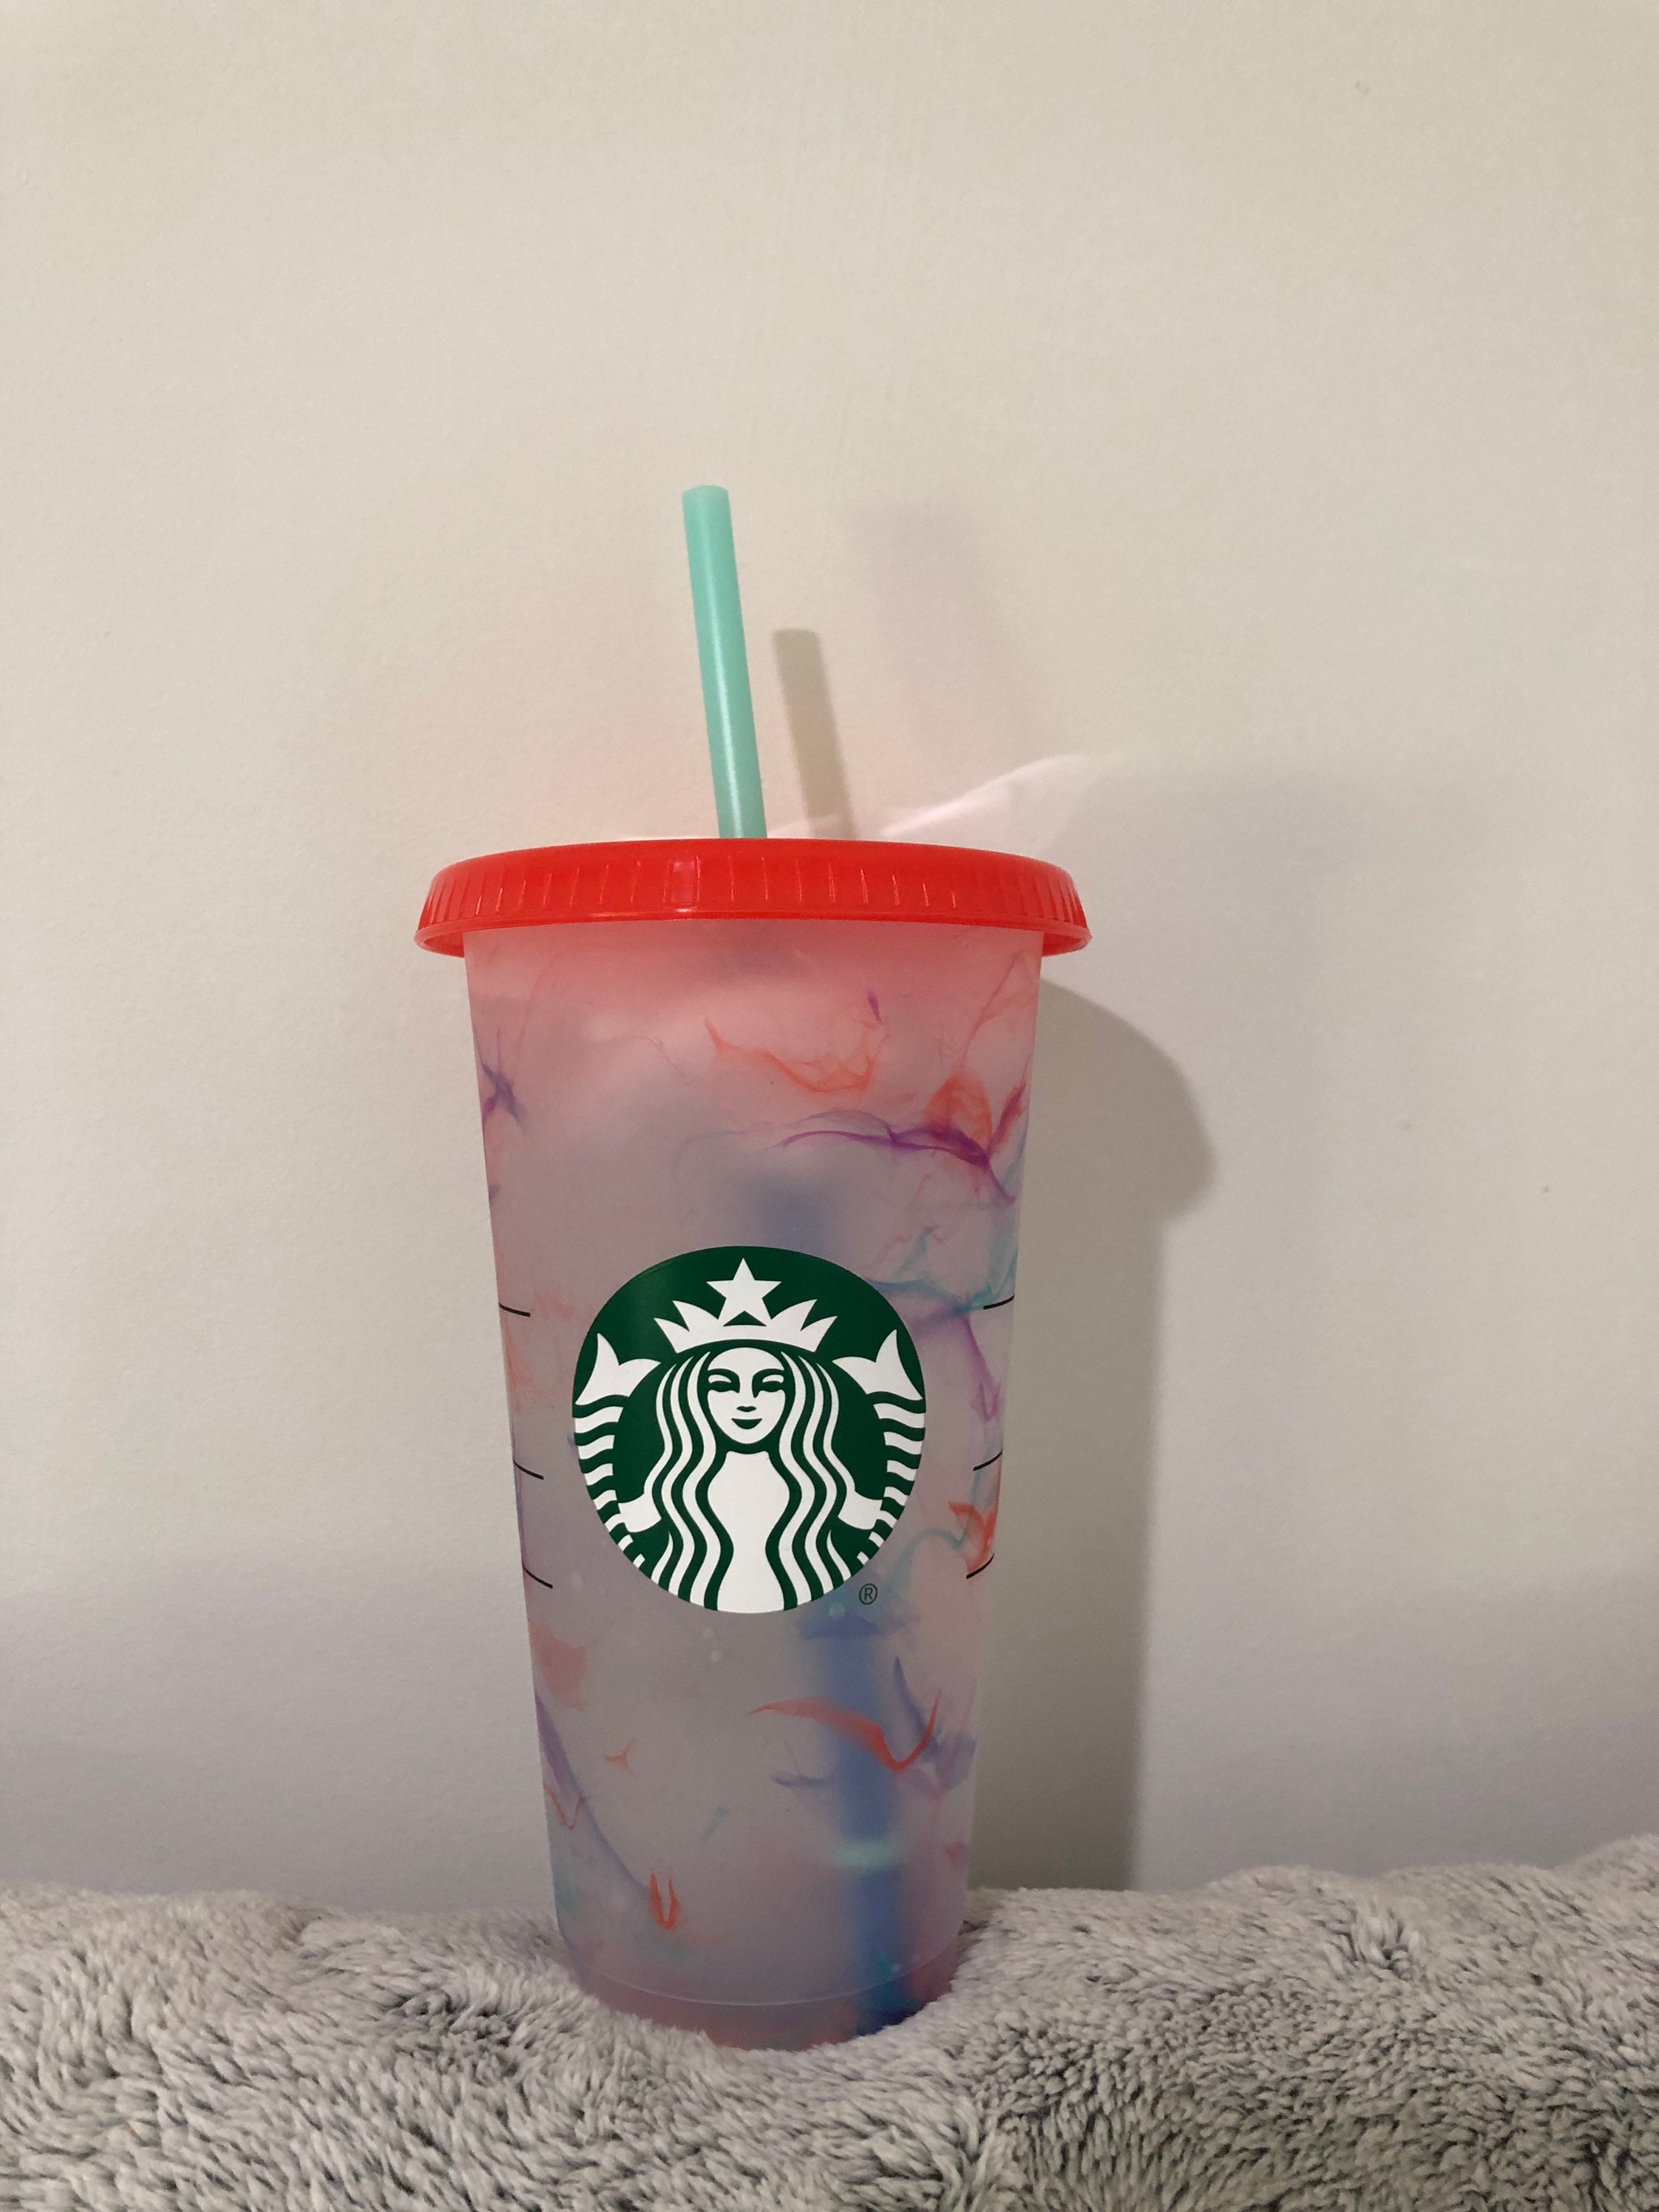 Starbucks Color Changing Cold Cup Set With Lid, Straw, And Confetti Reusable  Plastic Starbucks Reusable Cups For Fluid Oils And Livebecool Beverages  From Nstarbuckscup, $1.41